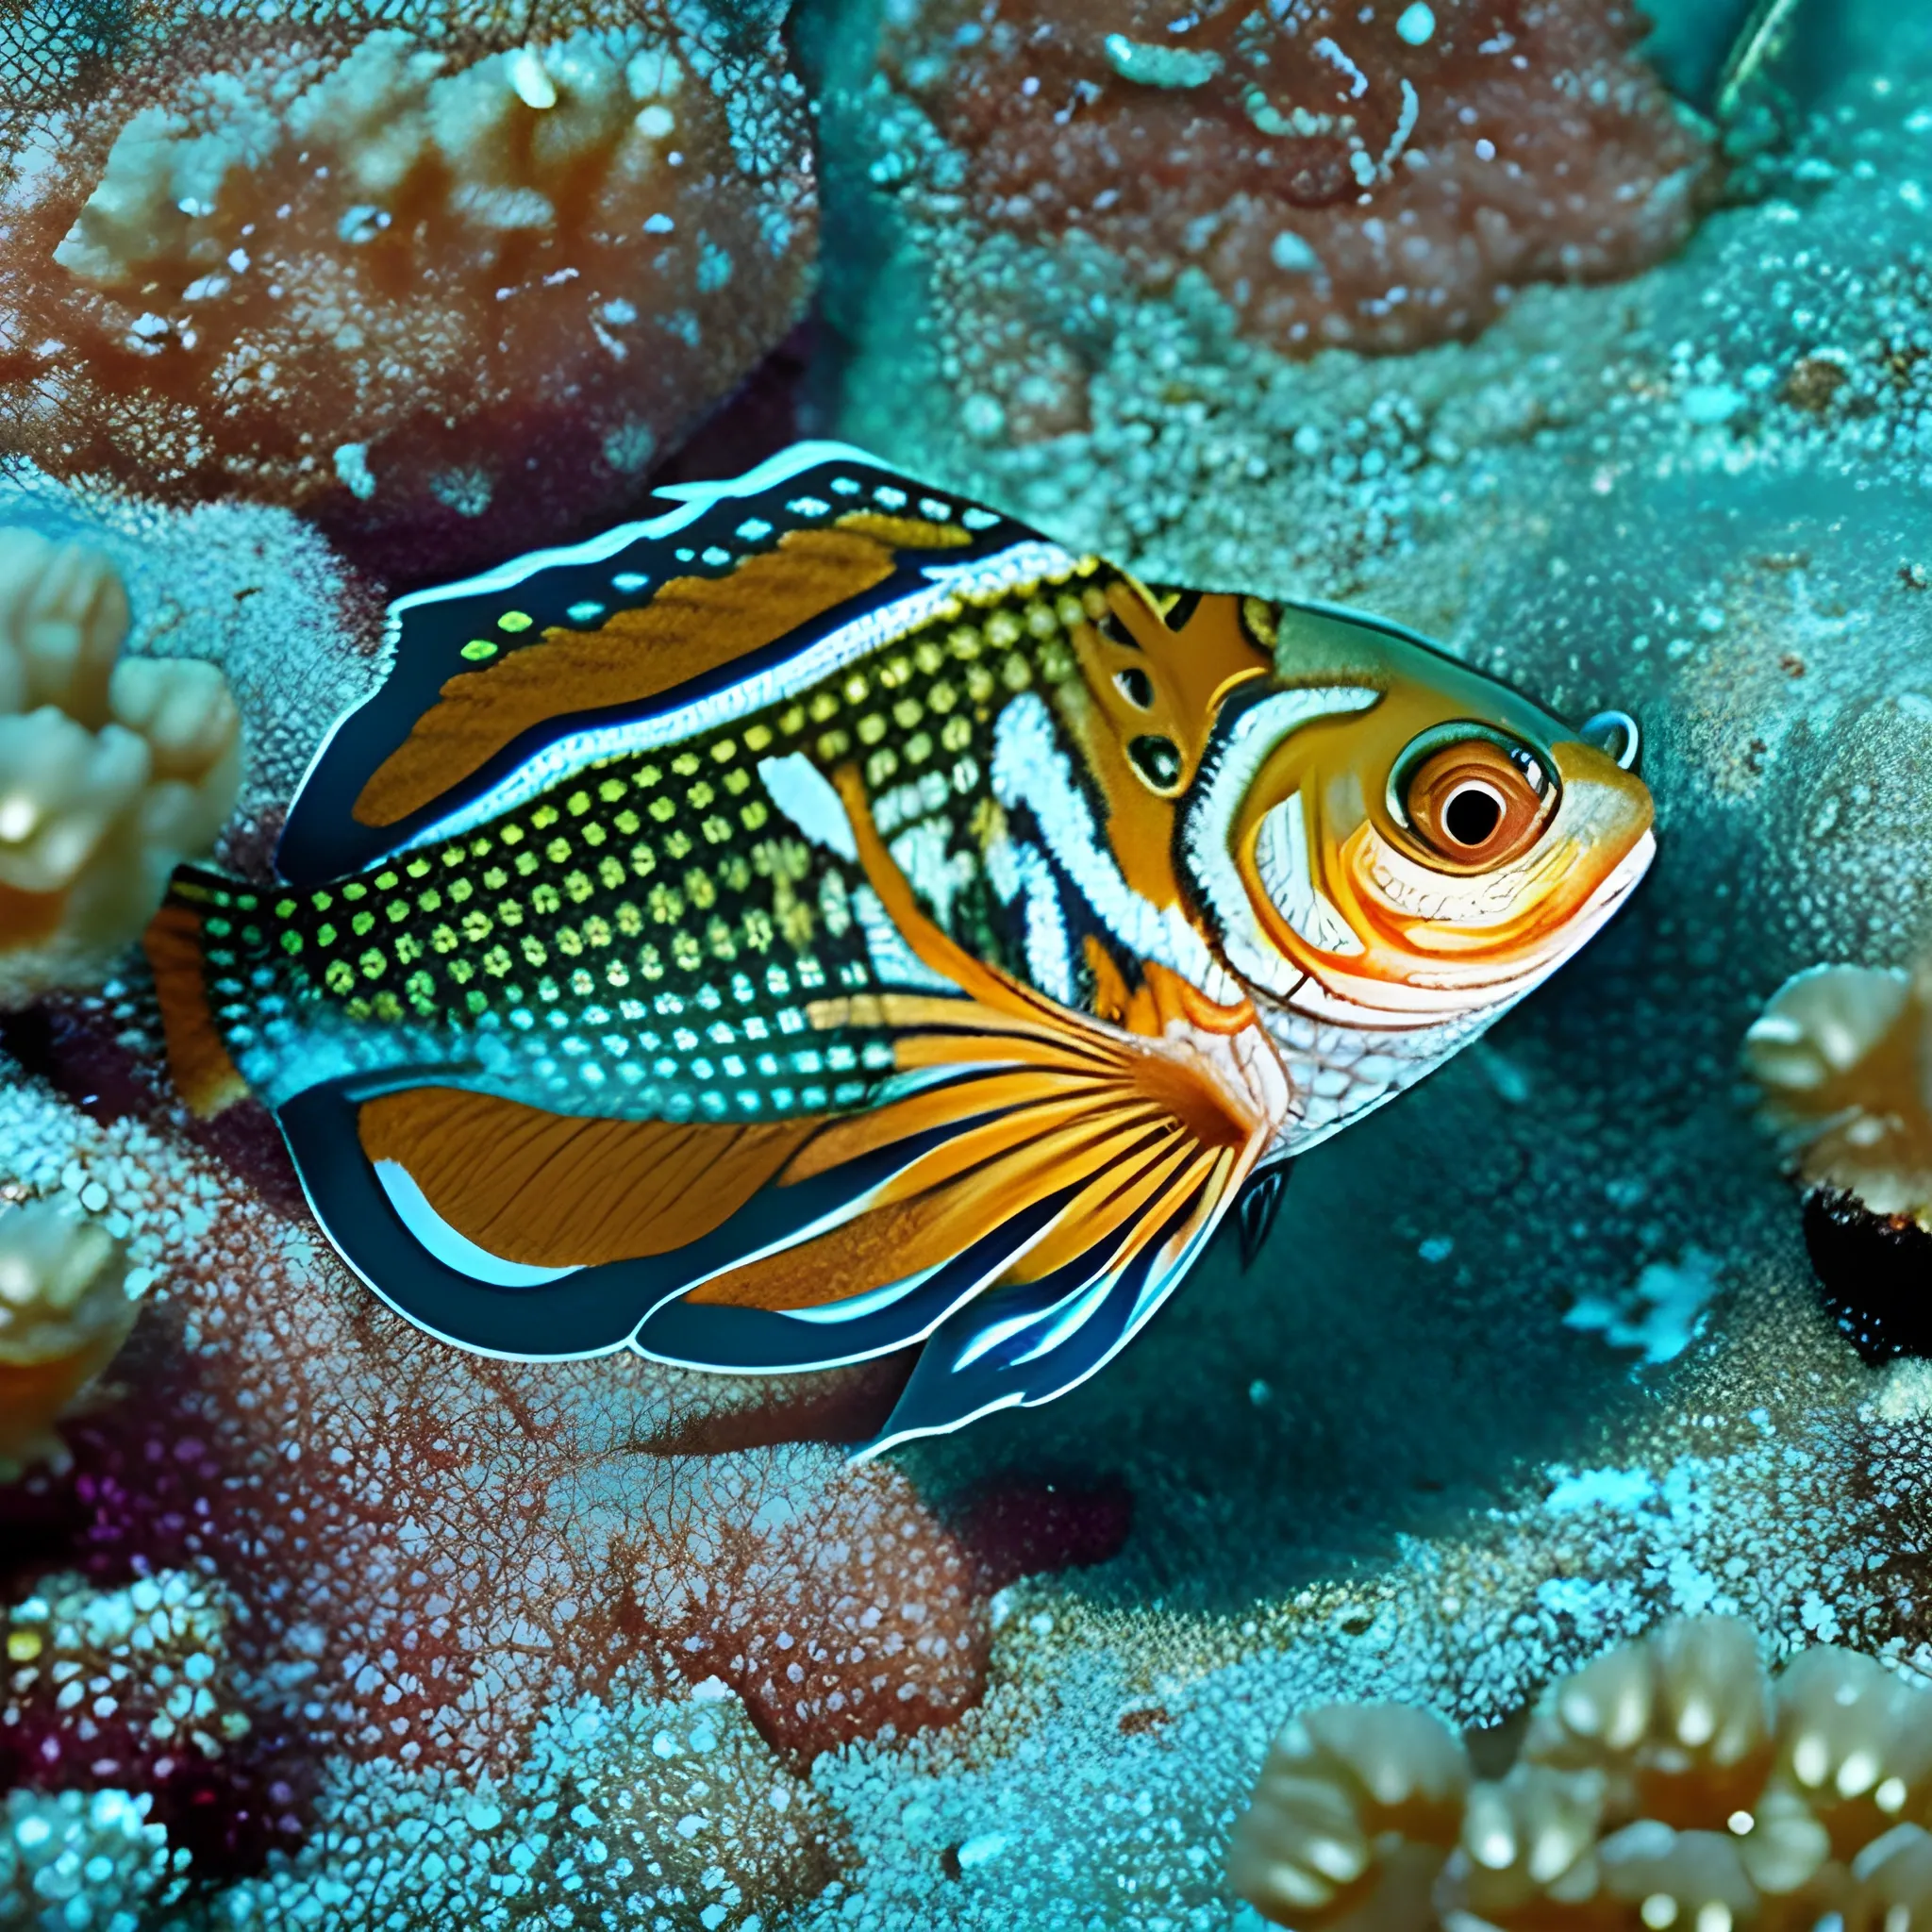 Macro photography showing intricate camouflage patterns and adaptations on the skin of fish observed, from dazzling countershading to irregular markings affording perfect ambush camouflage.